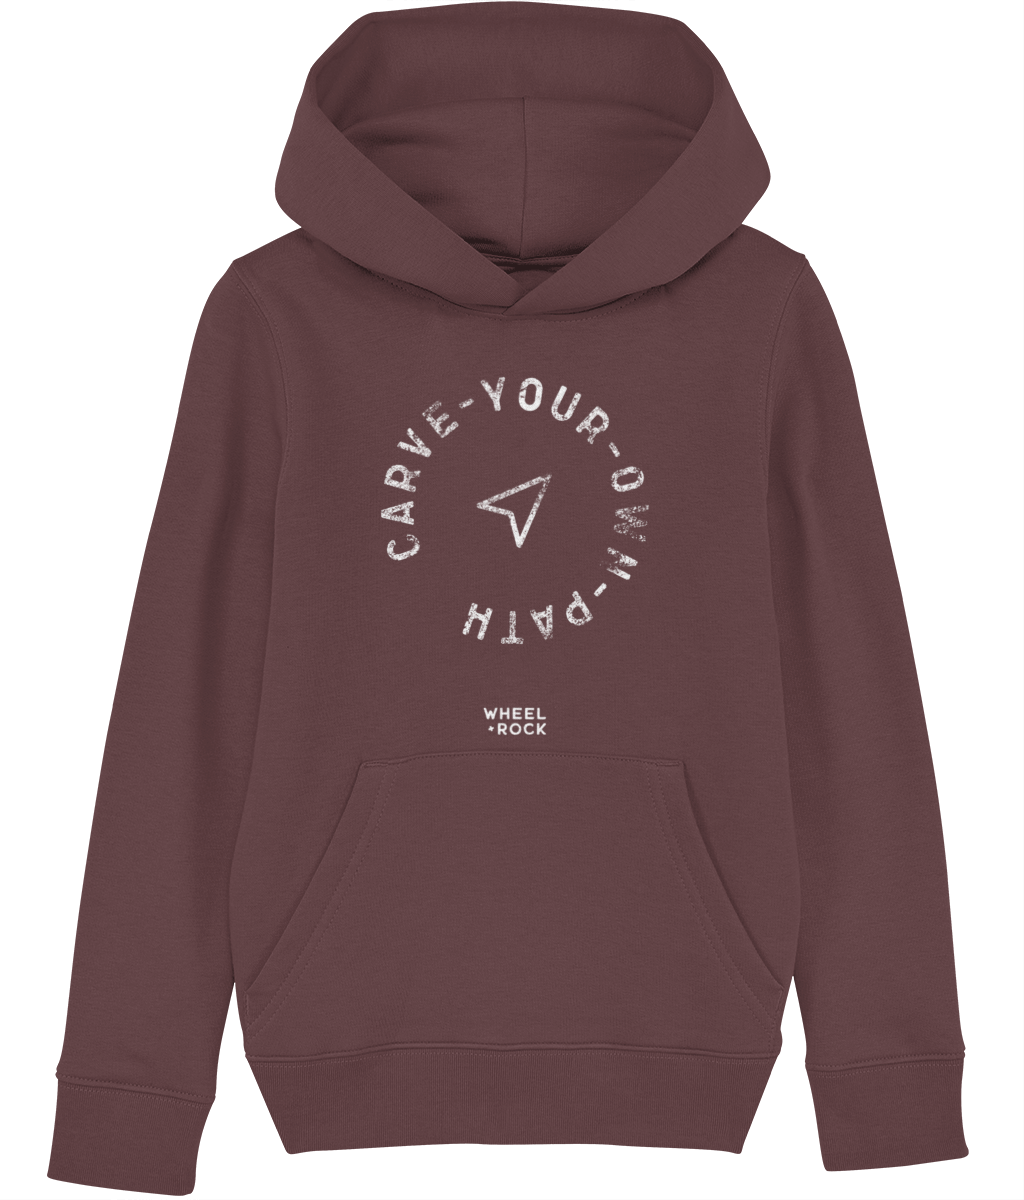 Carve Your Own Path - Kids Hoodie - WARMS